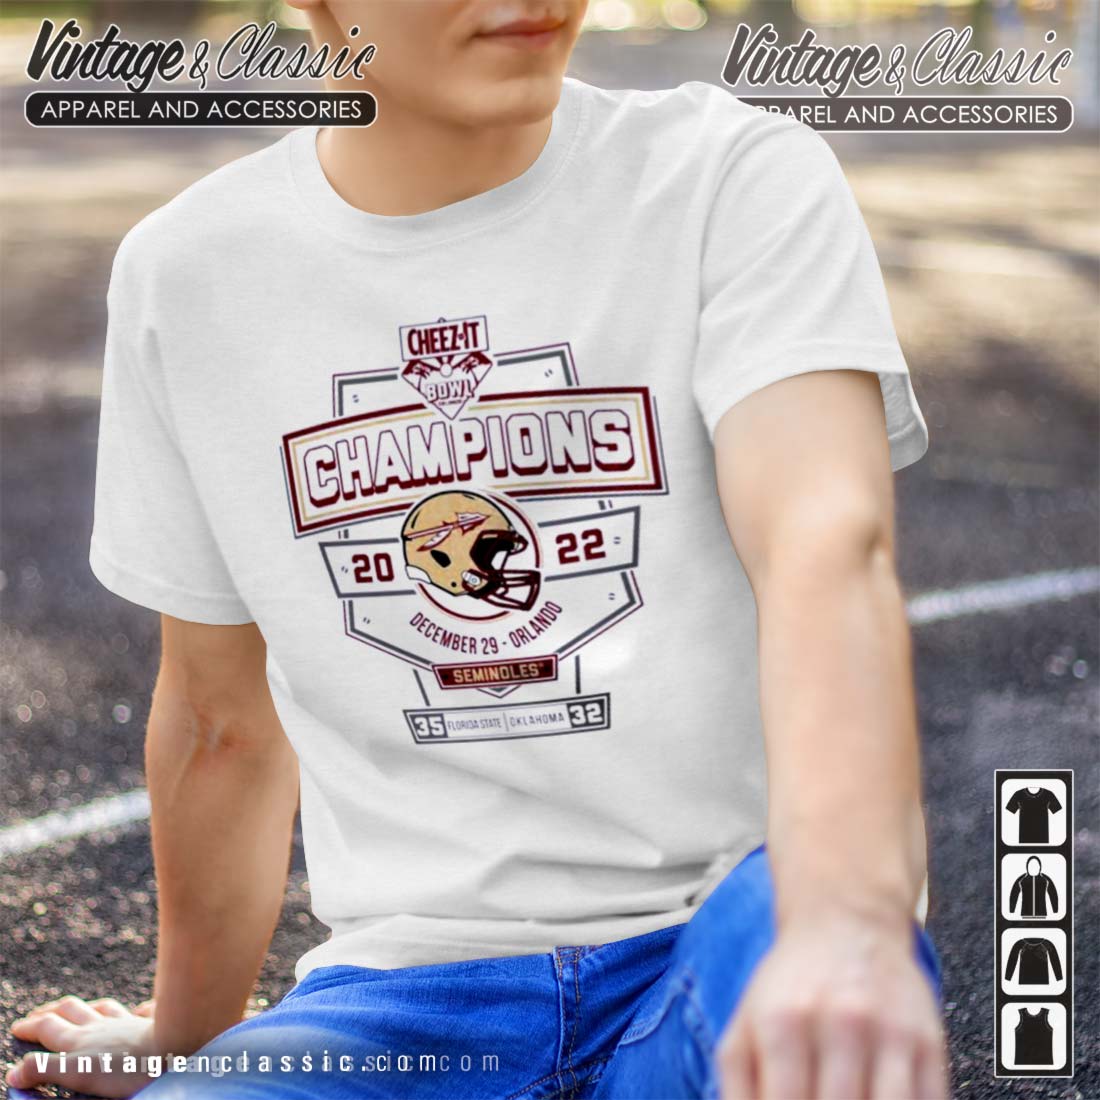 Arizona cardinals 2022 nfc west division champions shirt, hoodie, sweater,  long sleeve and tank top